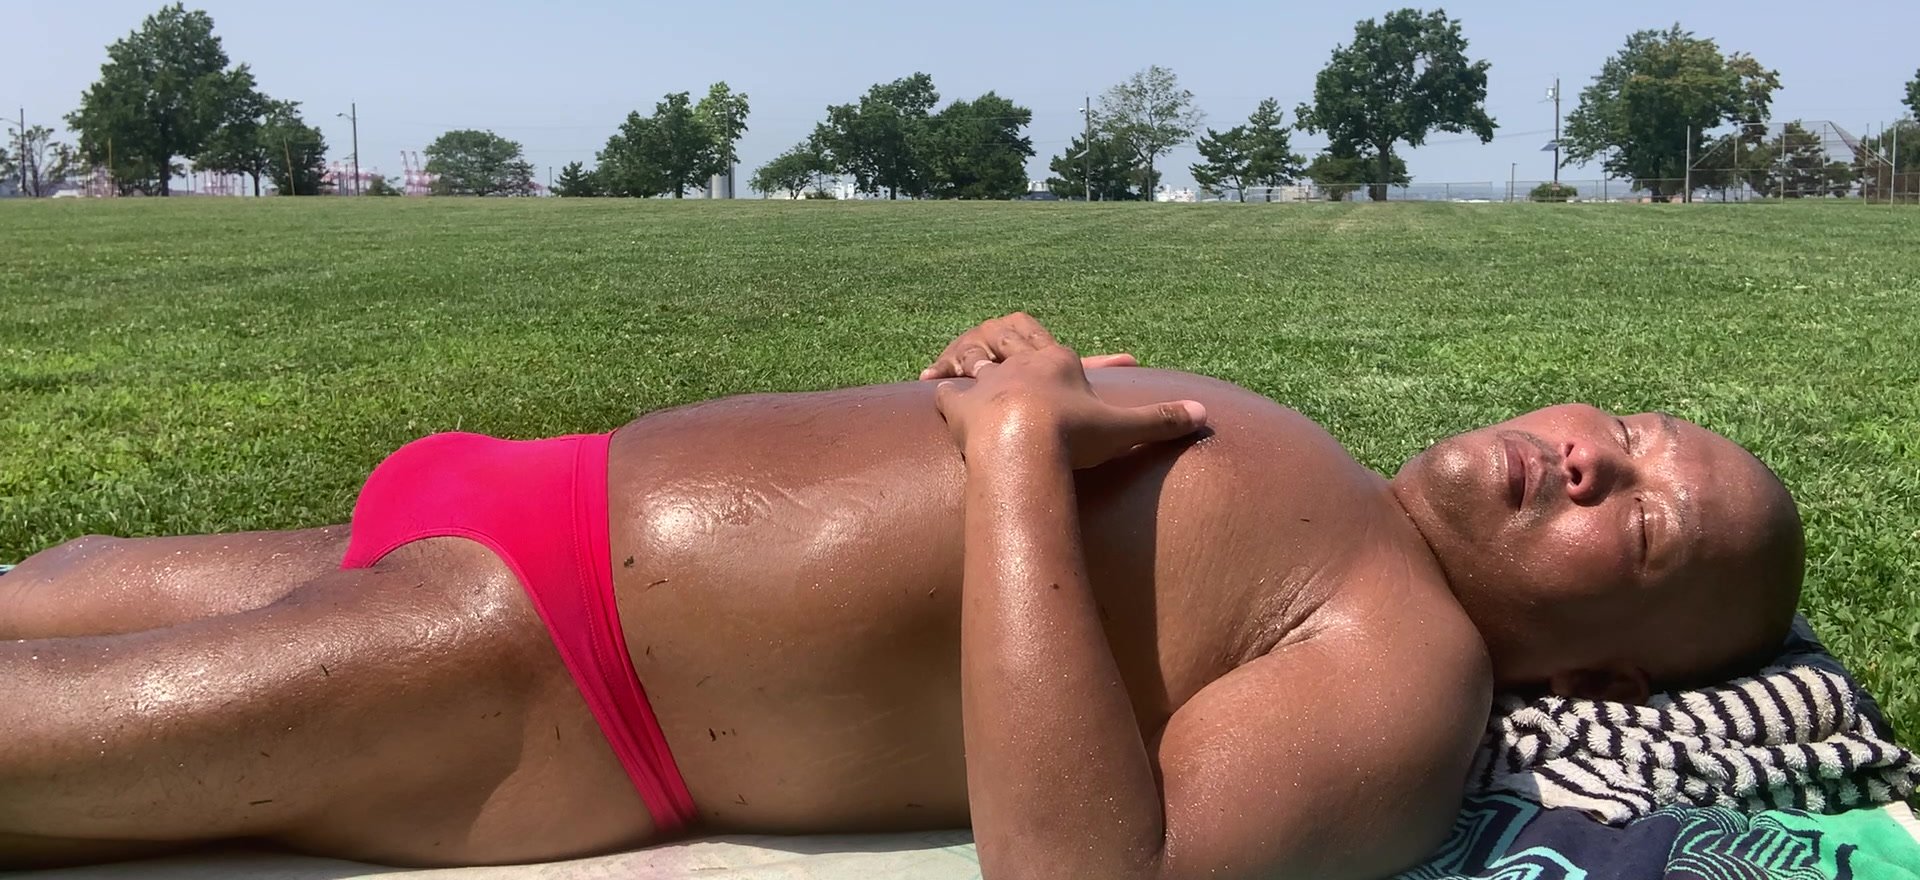 Sunbathing in  Sexy Hot Pink thong